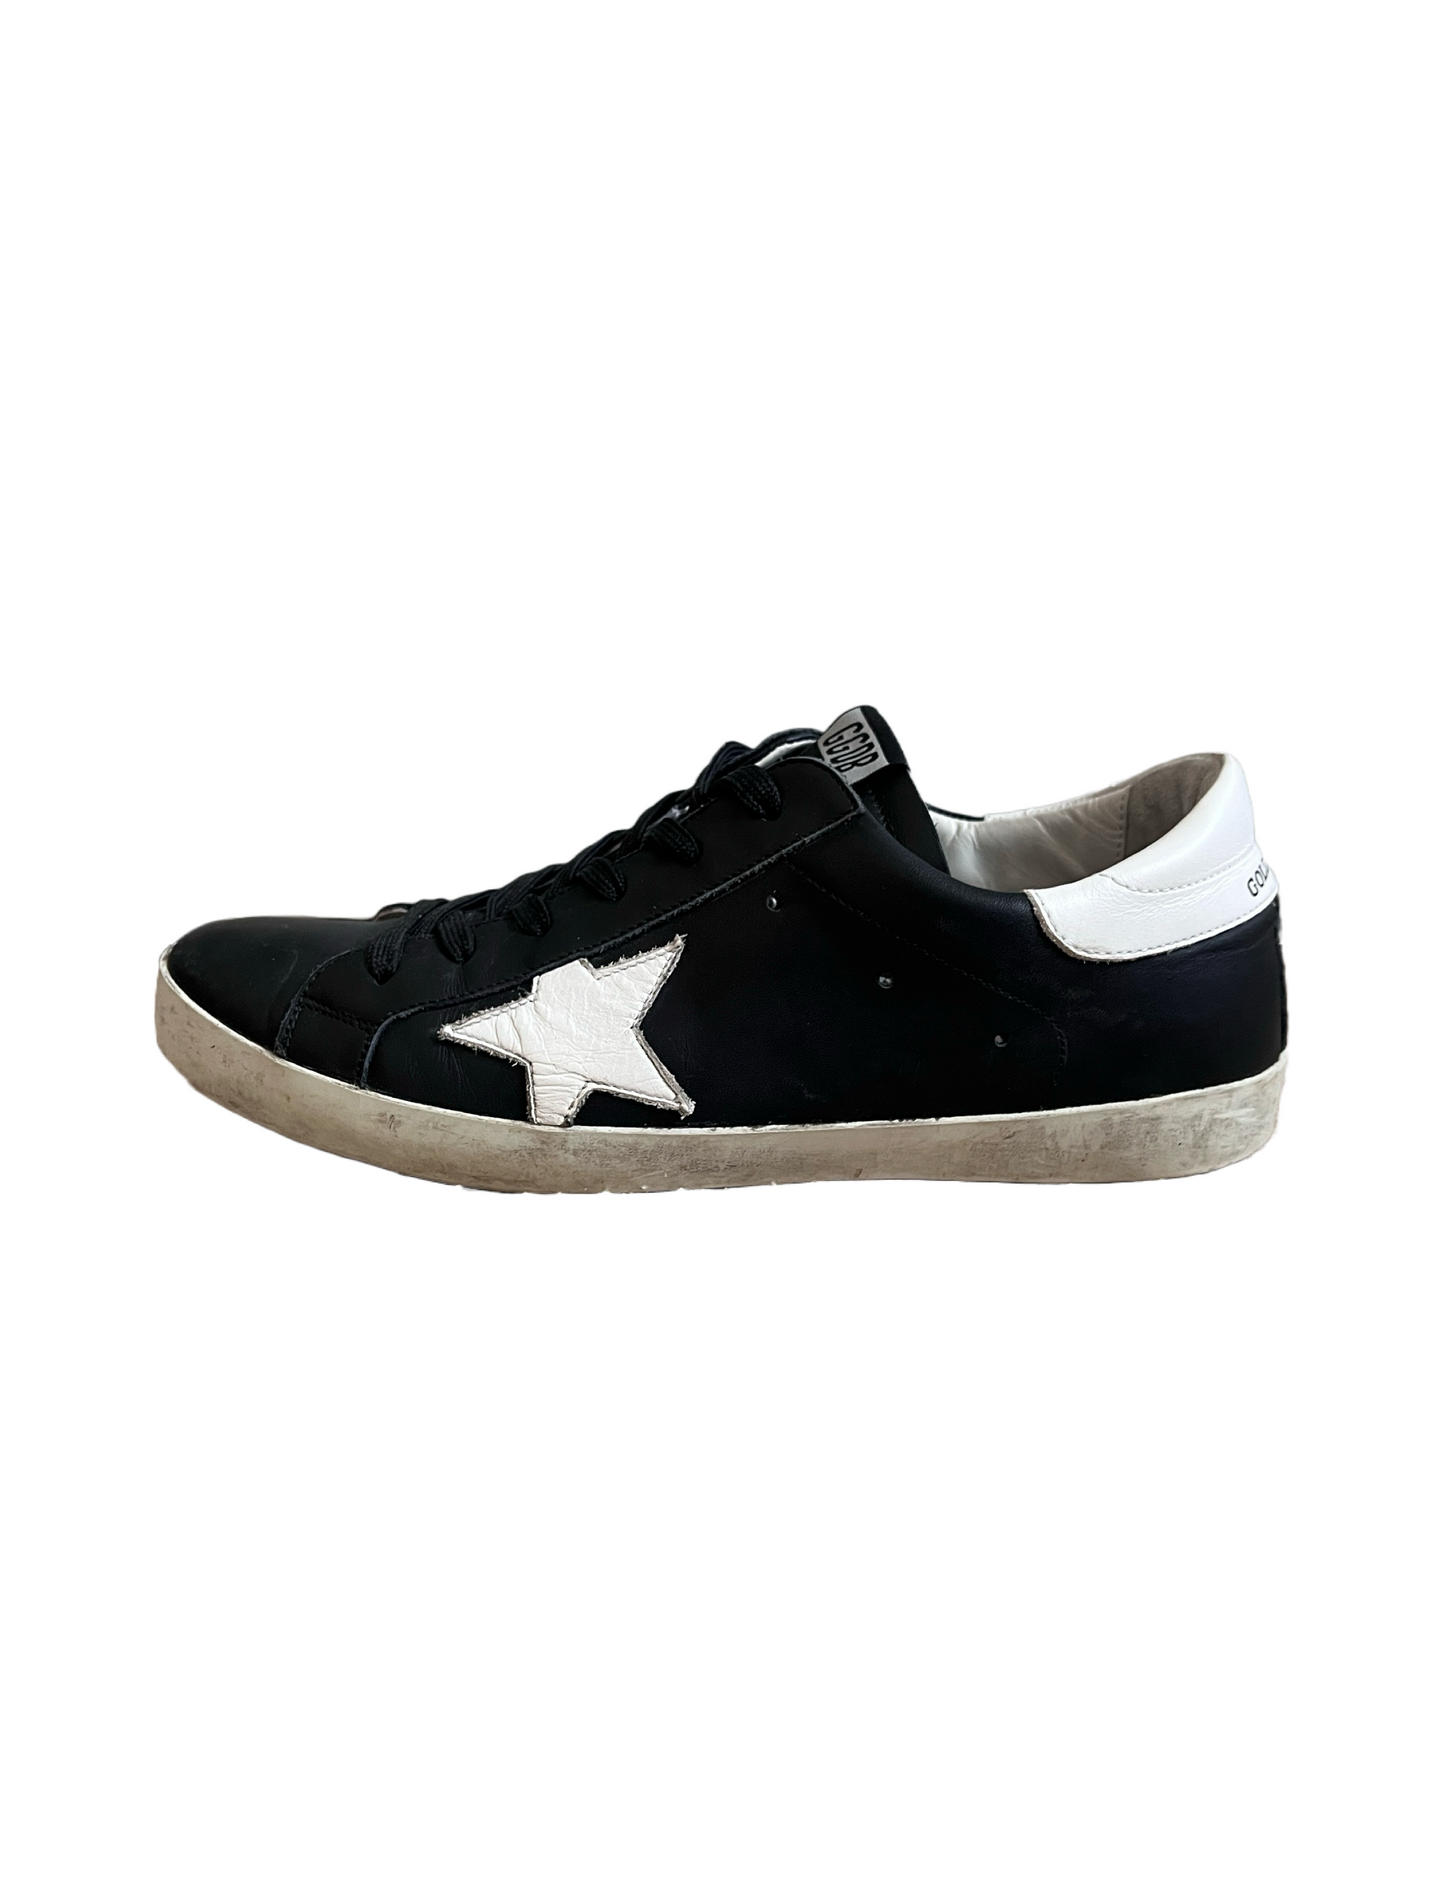 Golden goose sneakers (Black and white)